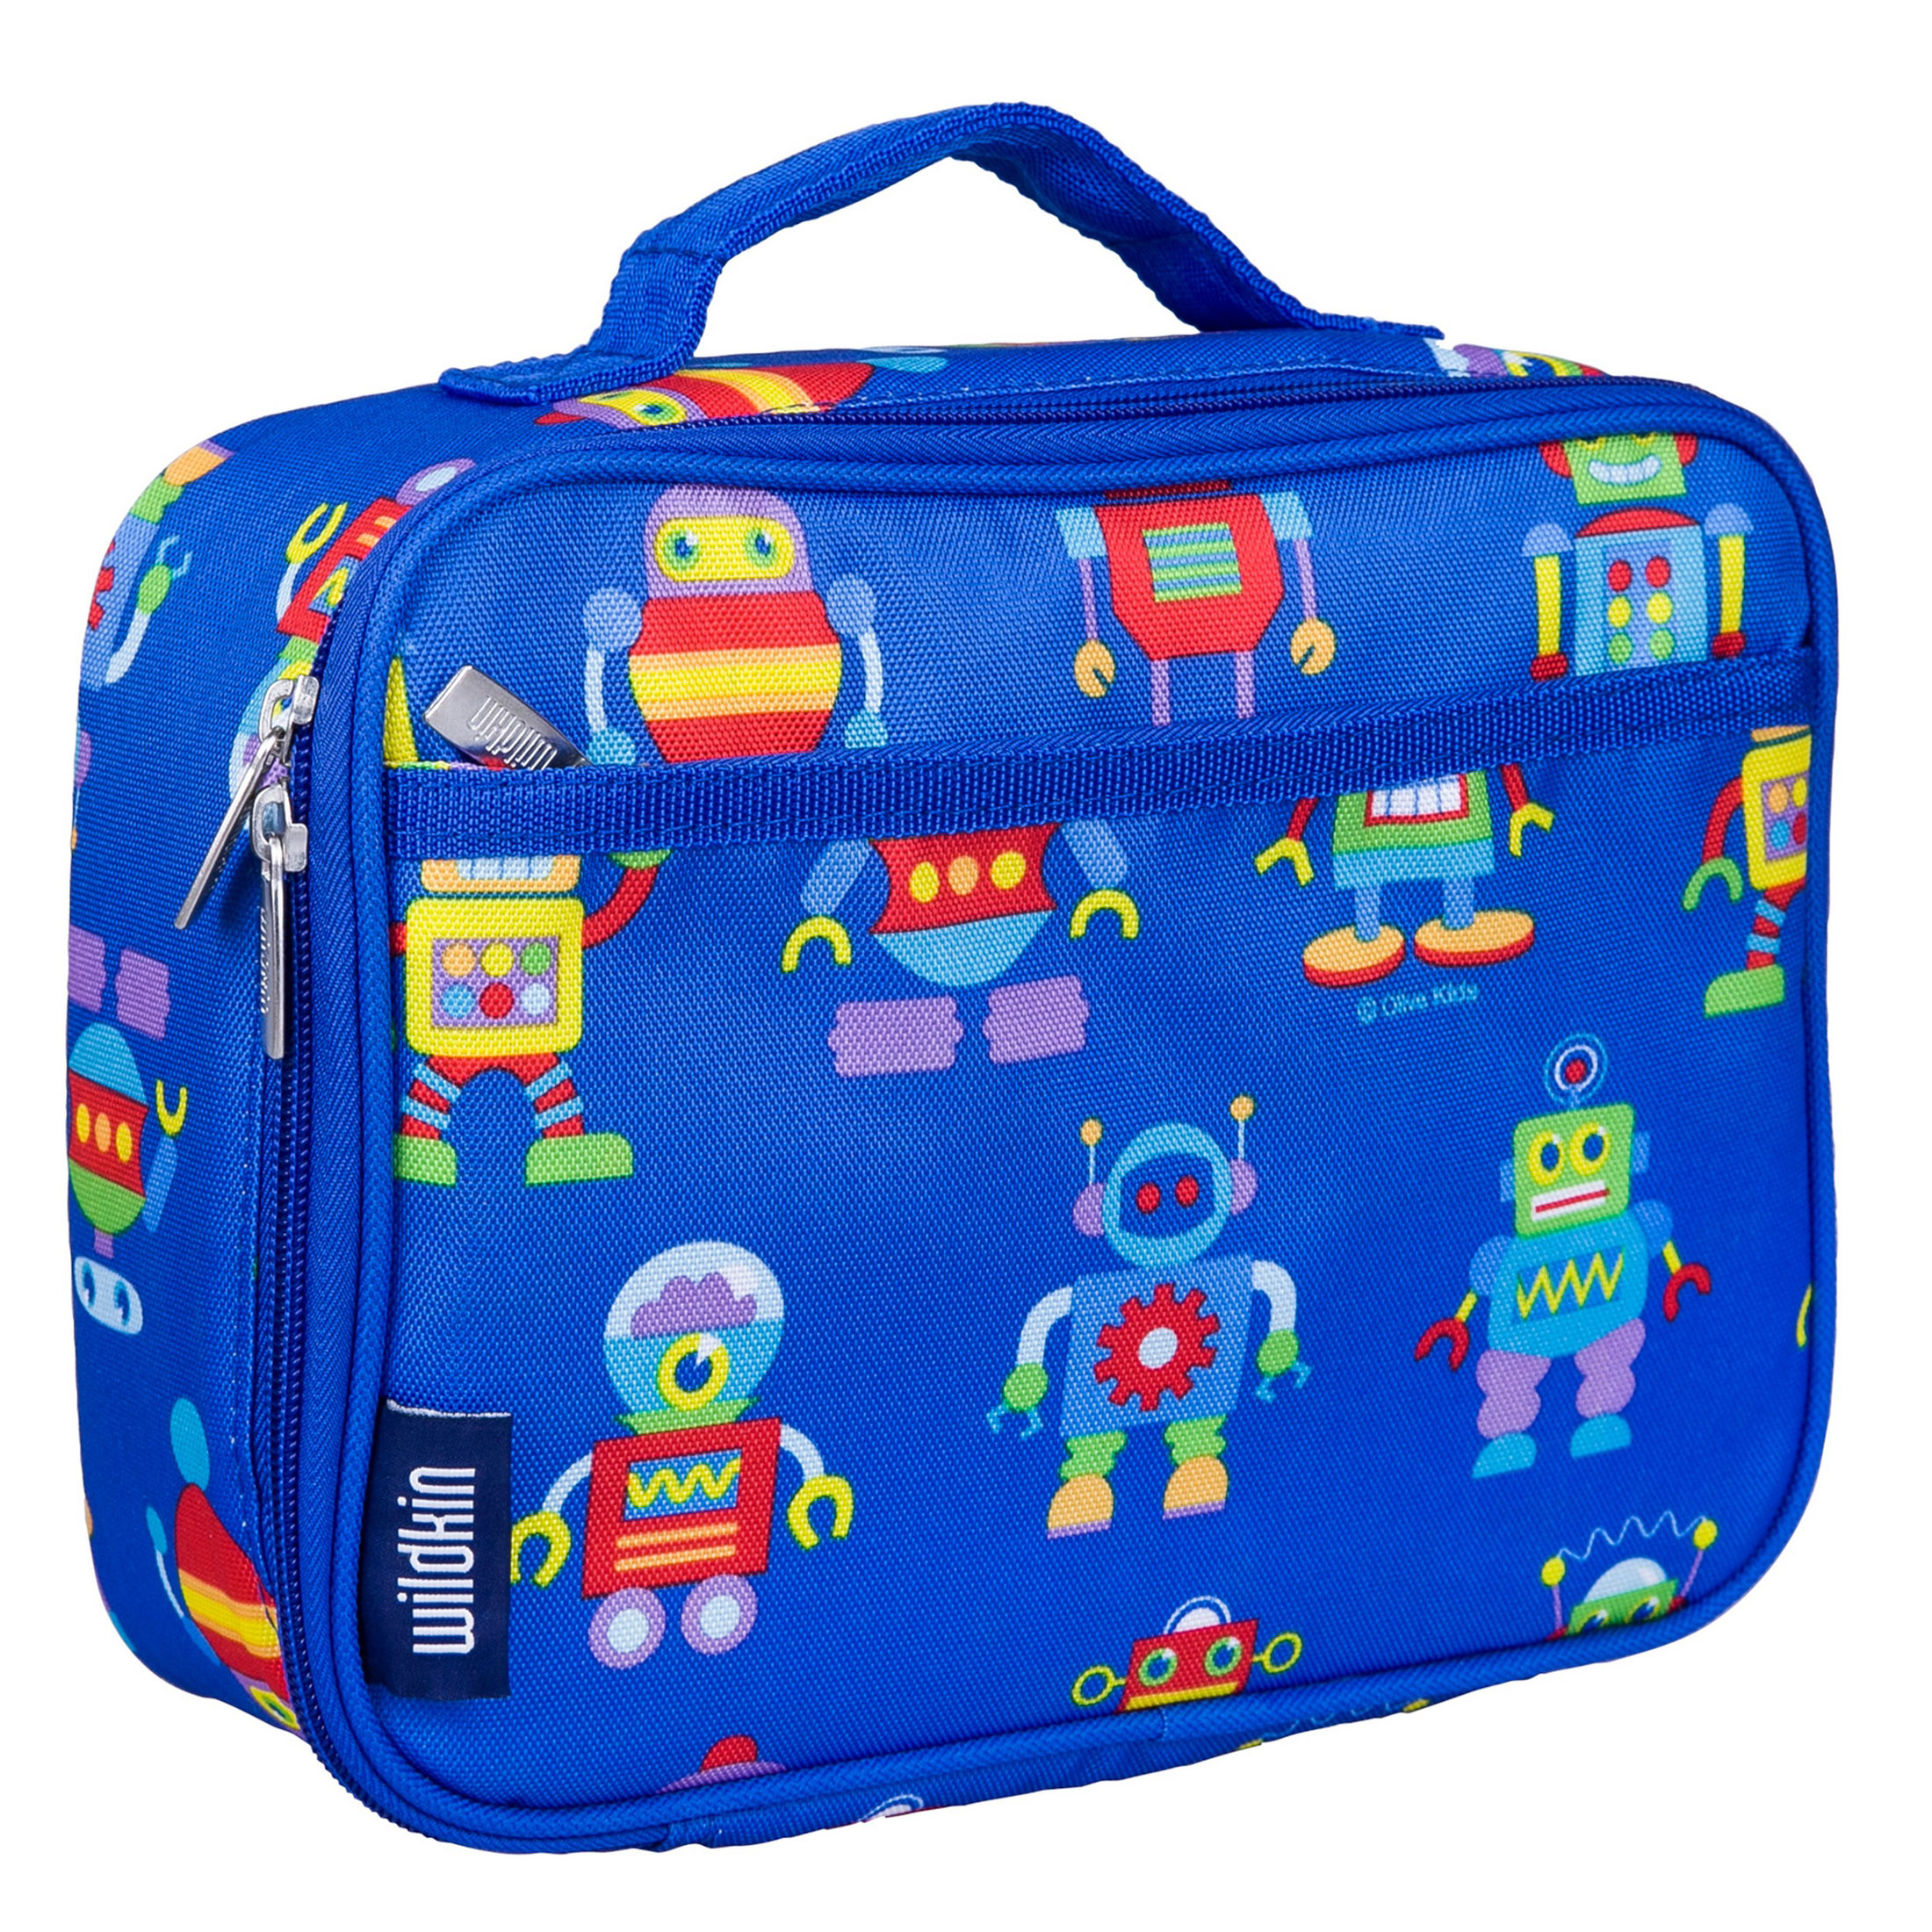 Wildkin Kids Insulated Lunch Box for Boy and Girls, BPA Free (Robots Blue) - image 1 of 8